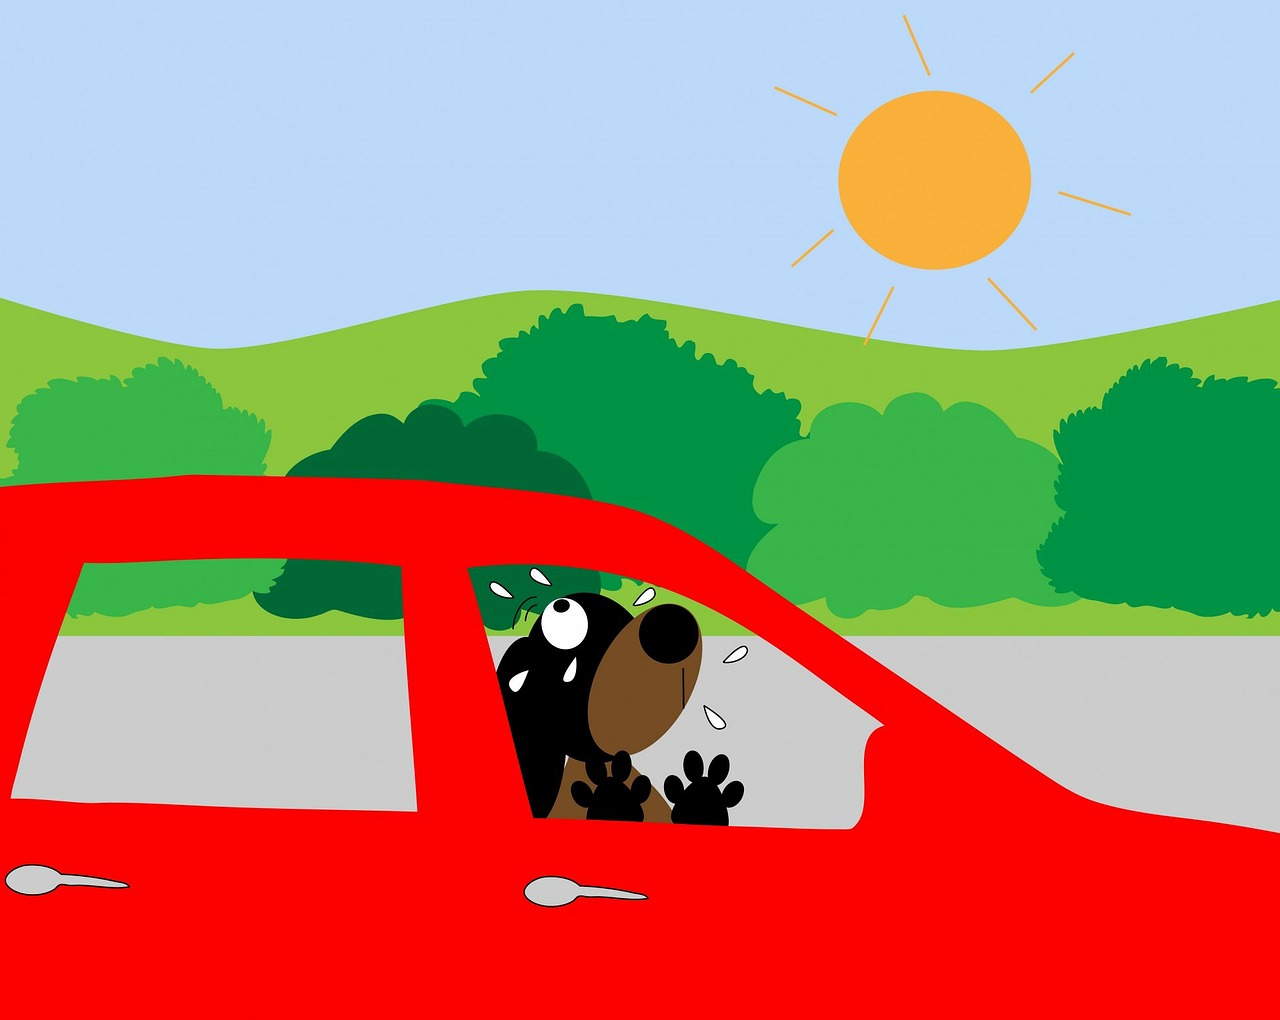 Driving safely with dogs